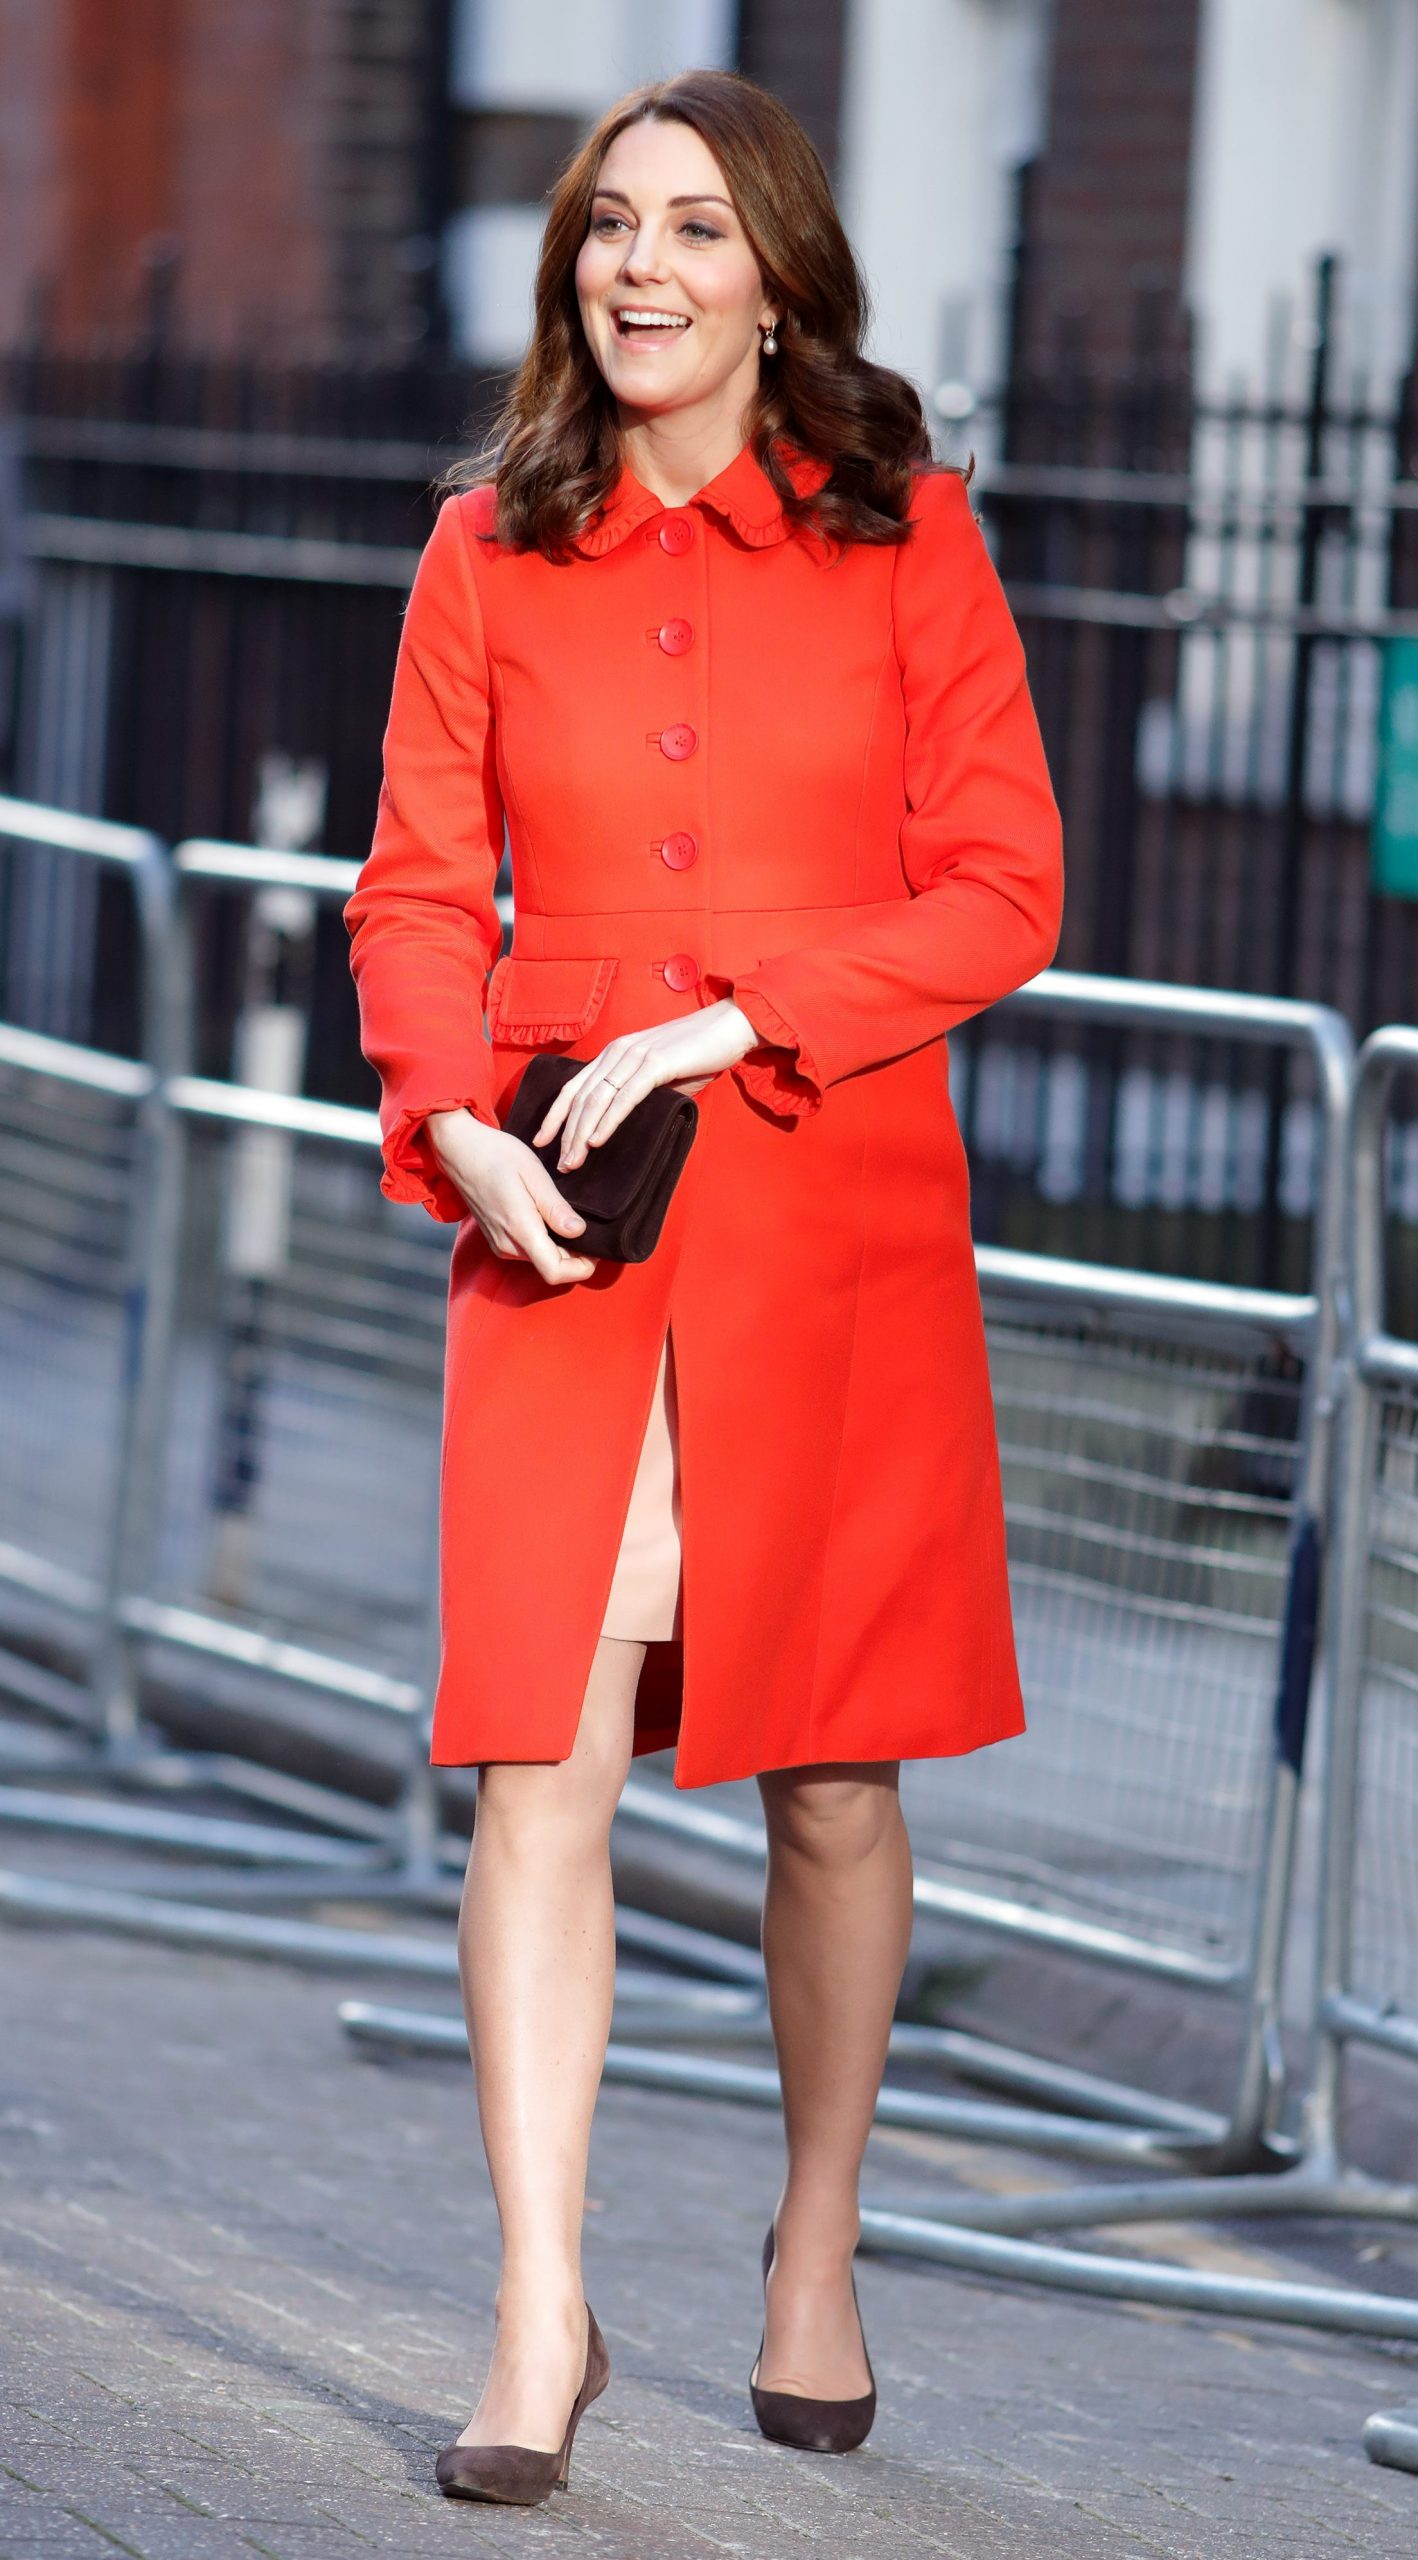 The duchess showed off a pop of color.